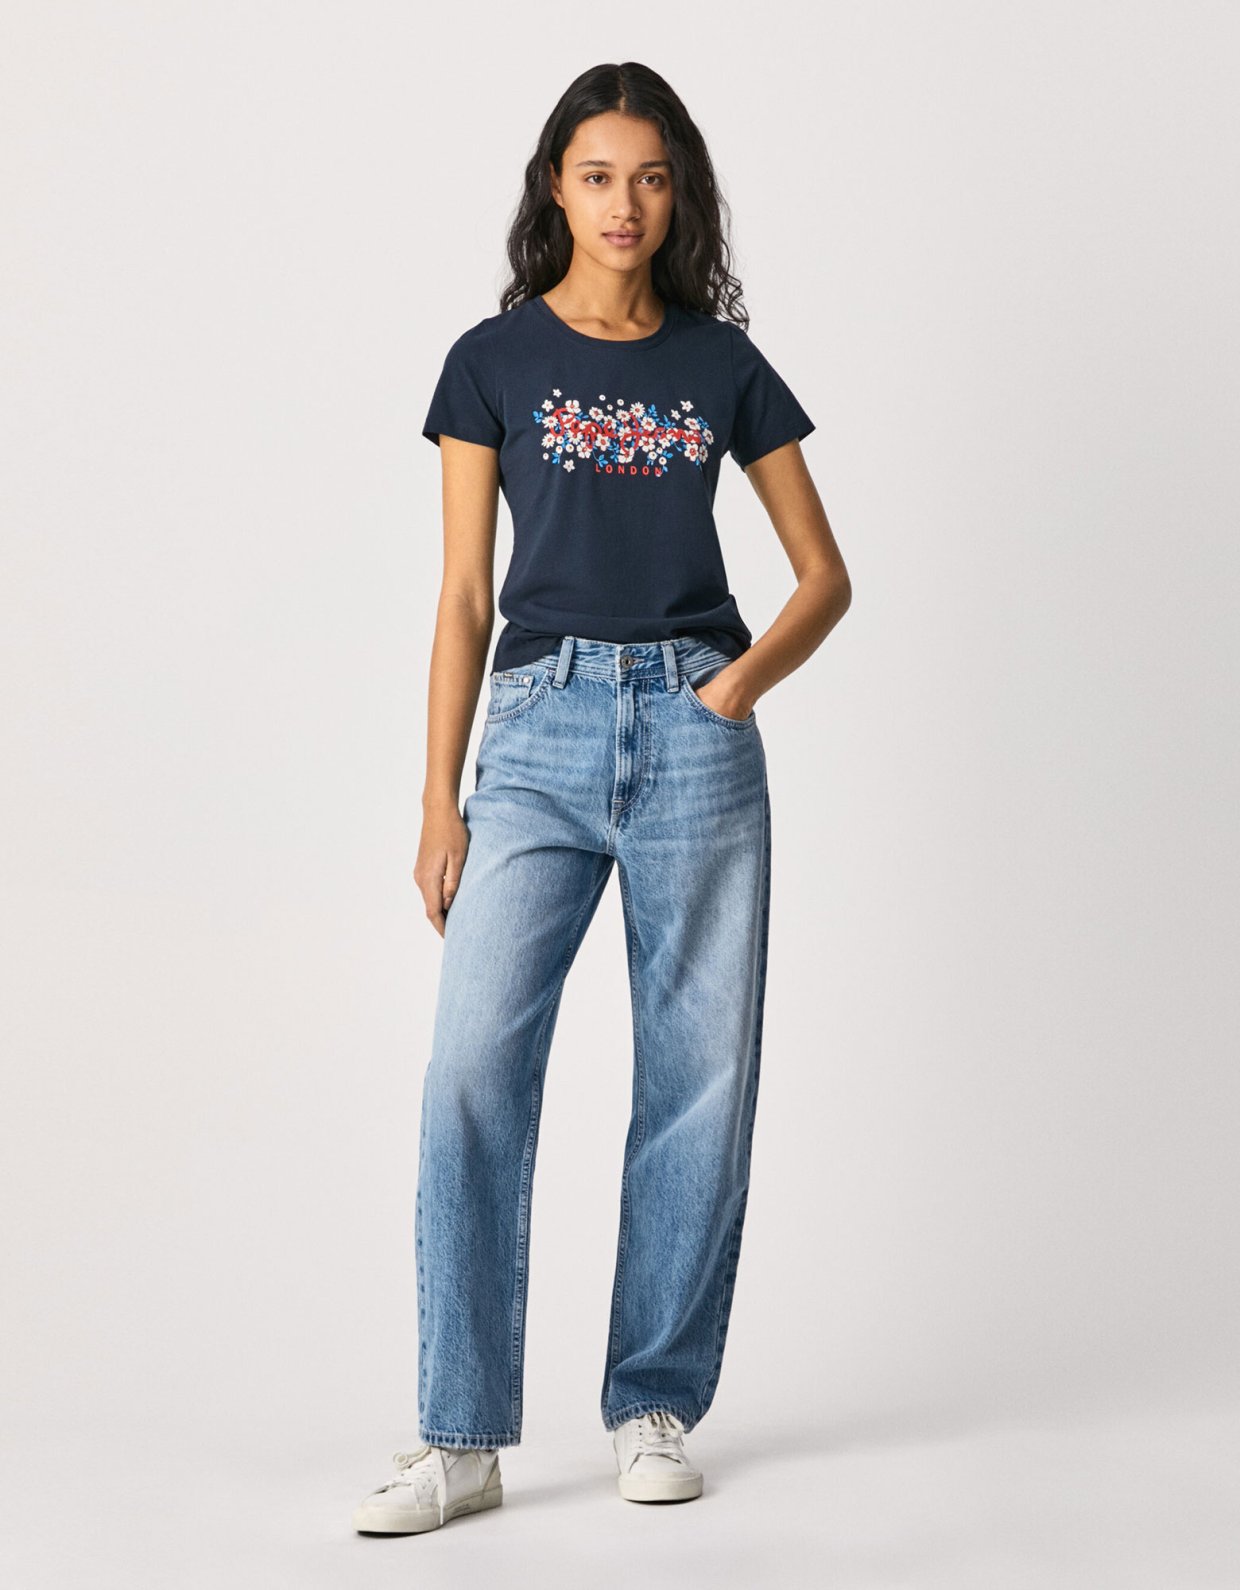 Pepe Jeans Bego t-shirt dulwich